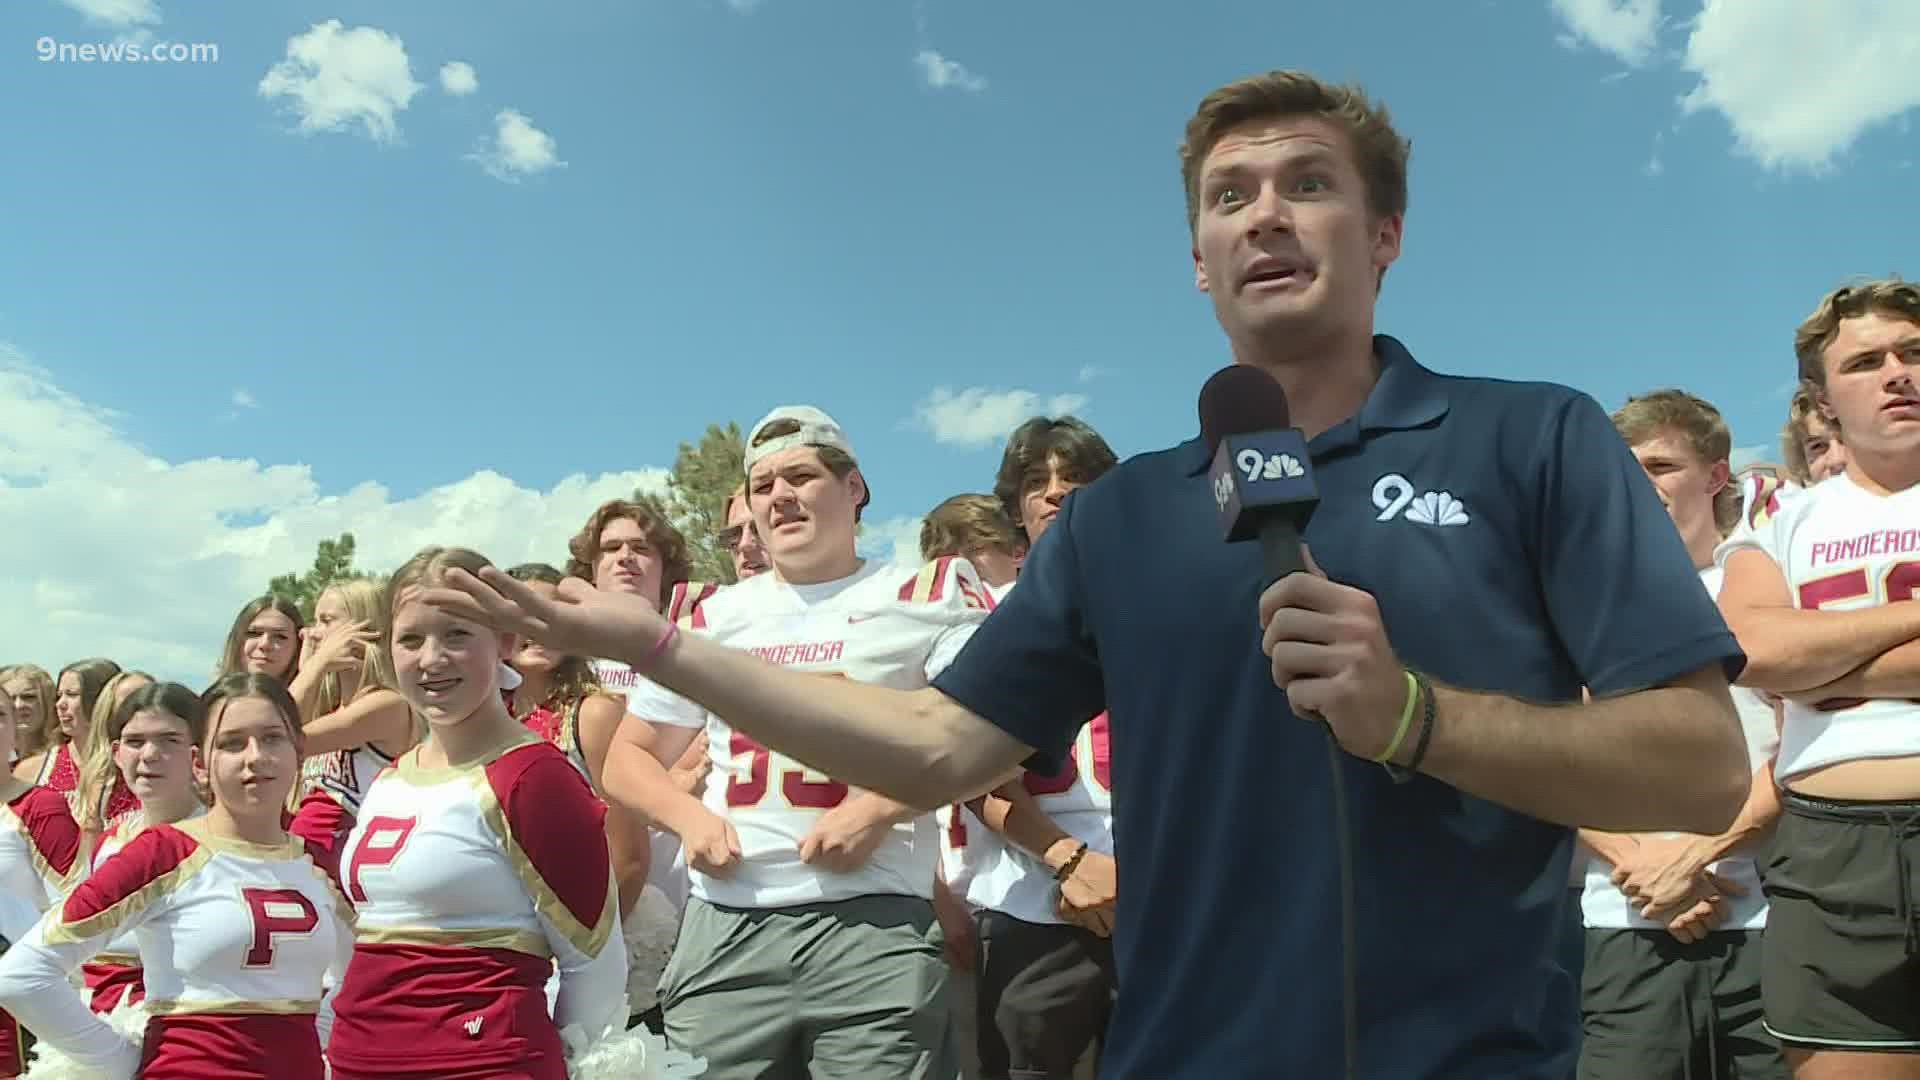 Scotty Gange visited the pep rally at Ponderosa High School ahead of the 9Preps Game of the Week.